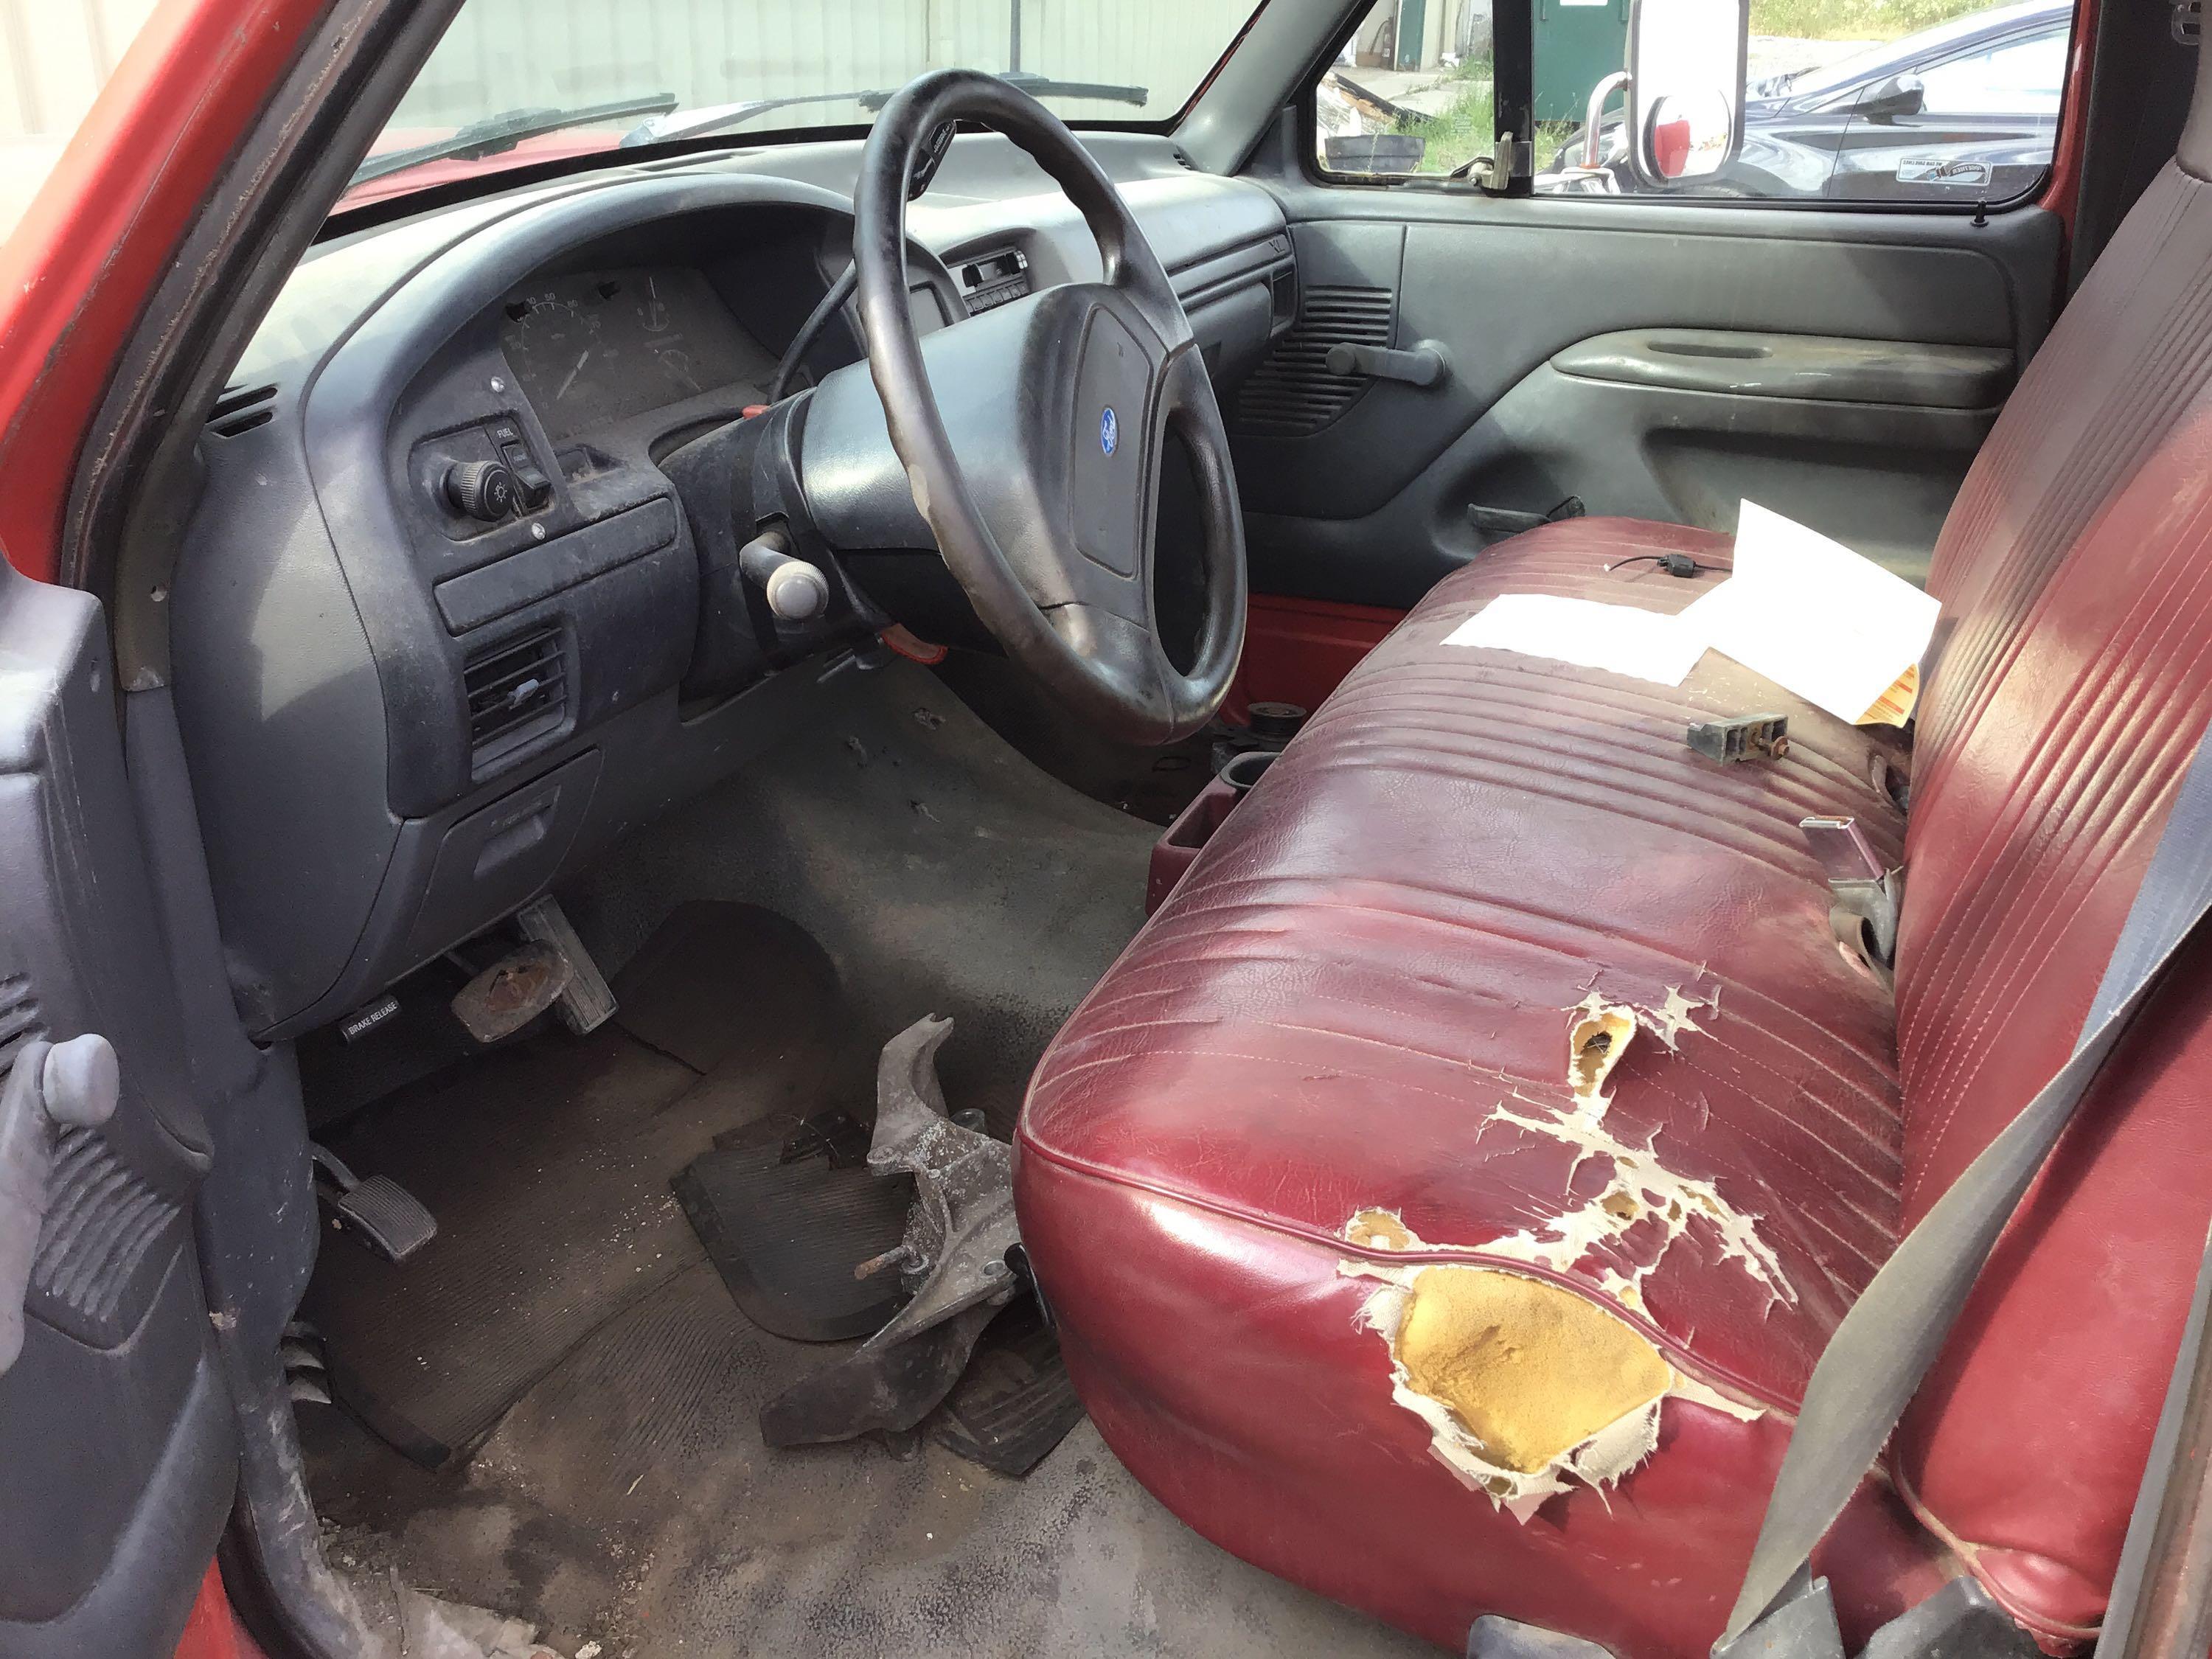 1992 Ford F 450 with stahl service body VIN #: 2fdlf47g3nca53793